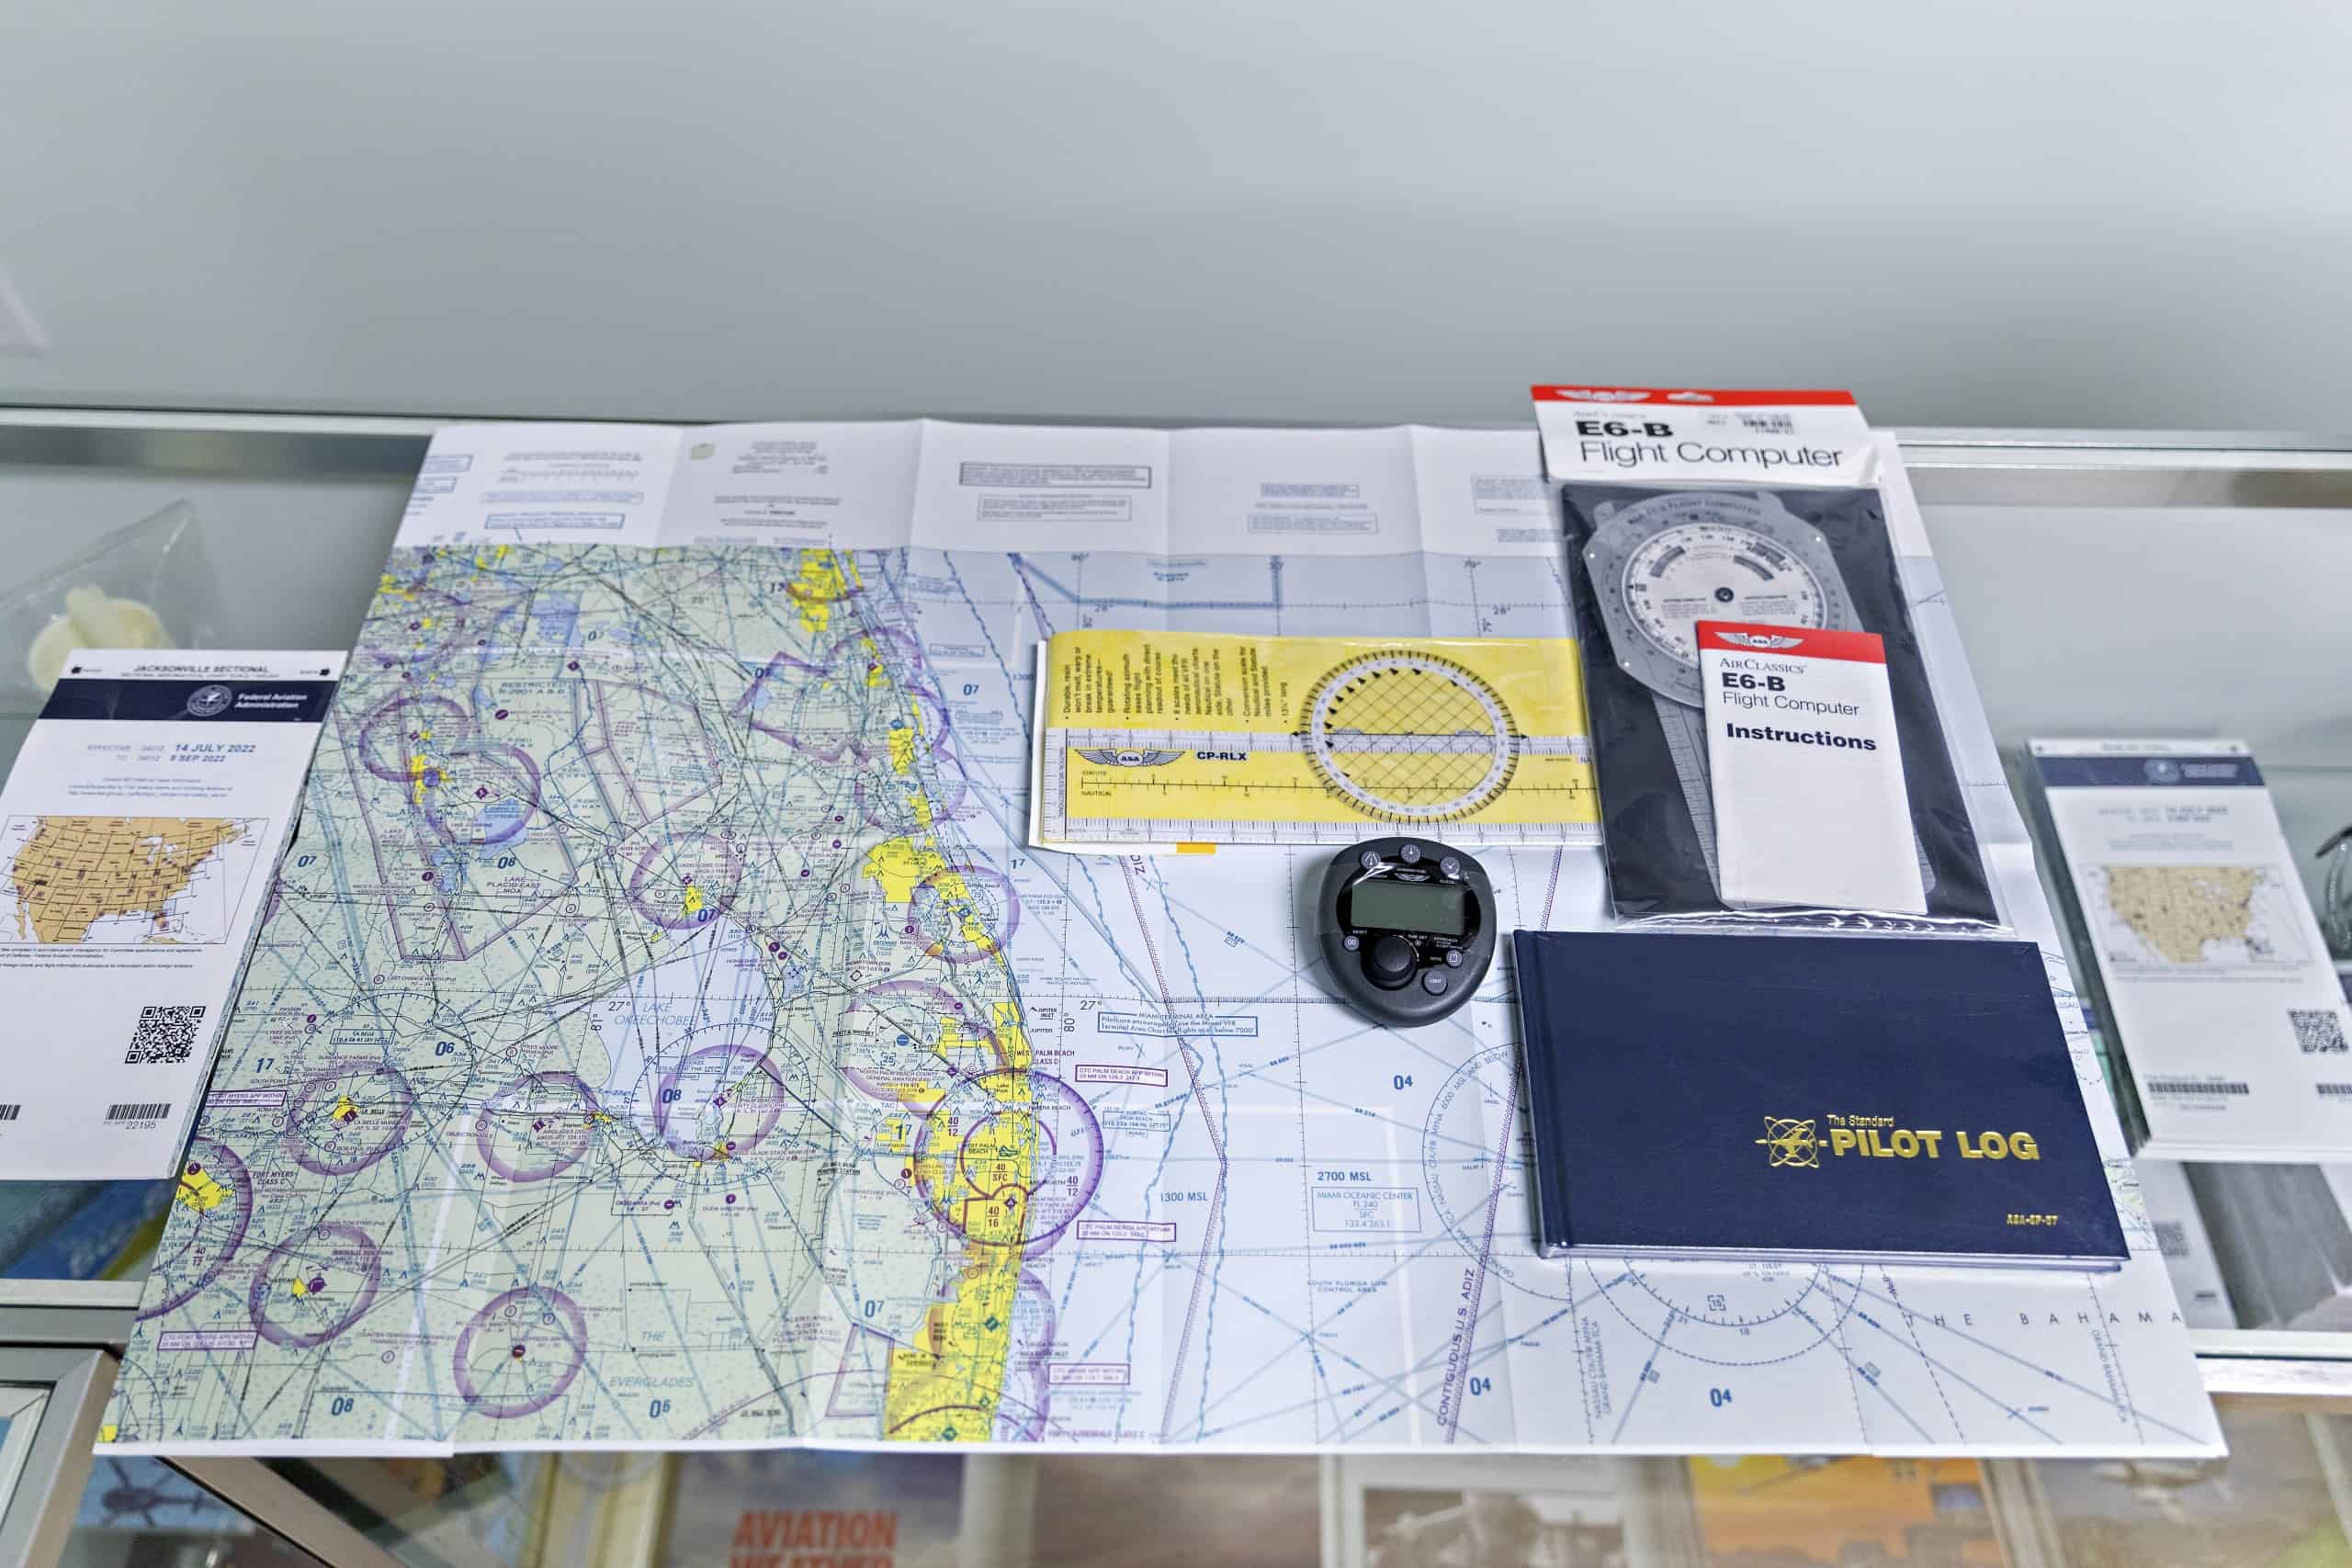 Flight navigation map with flight logbook and instruments